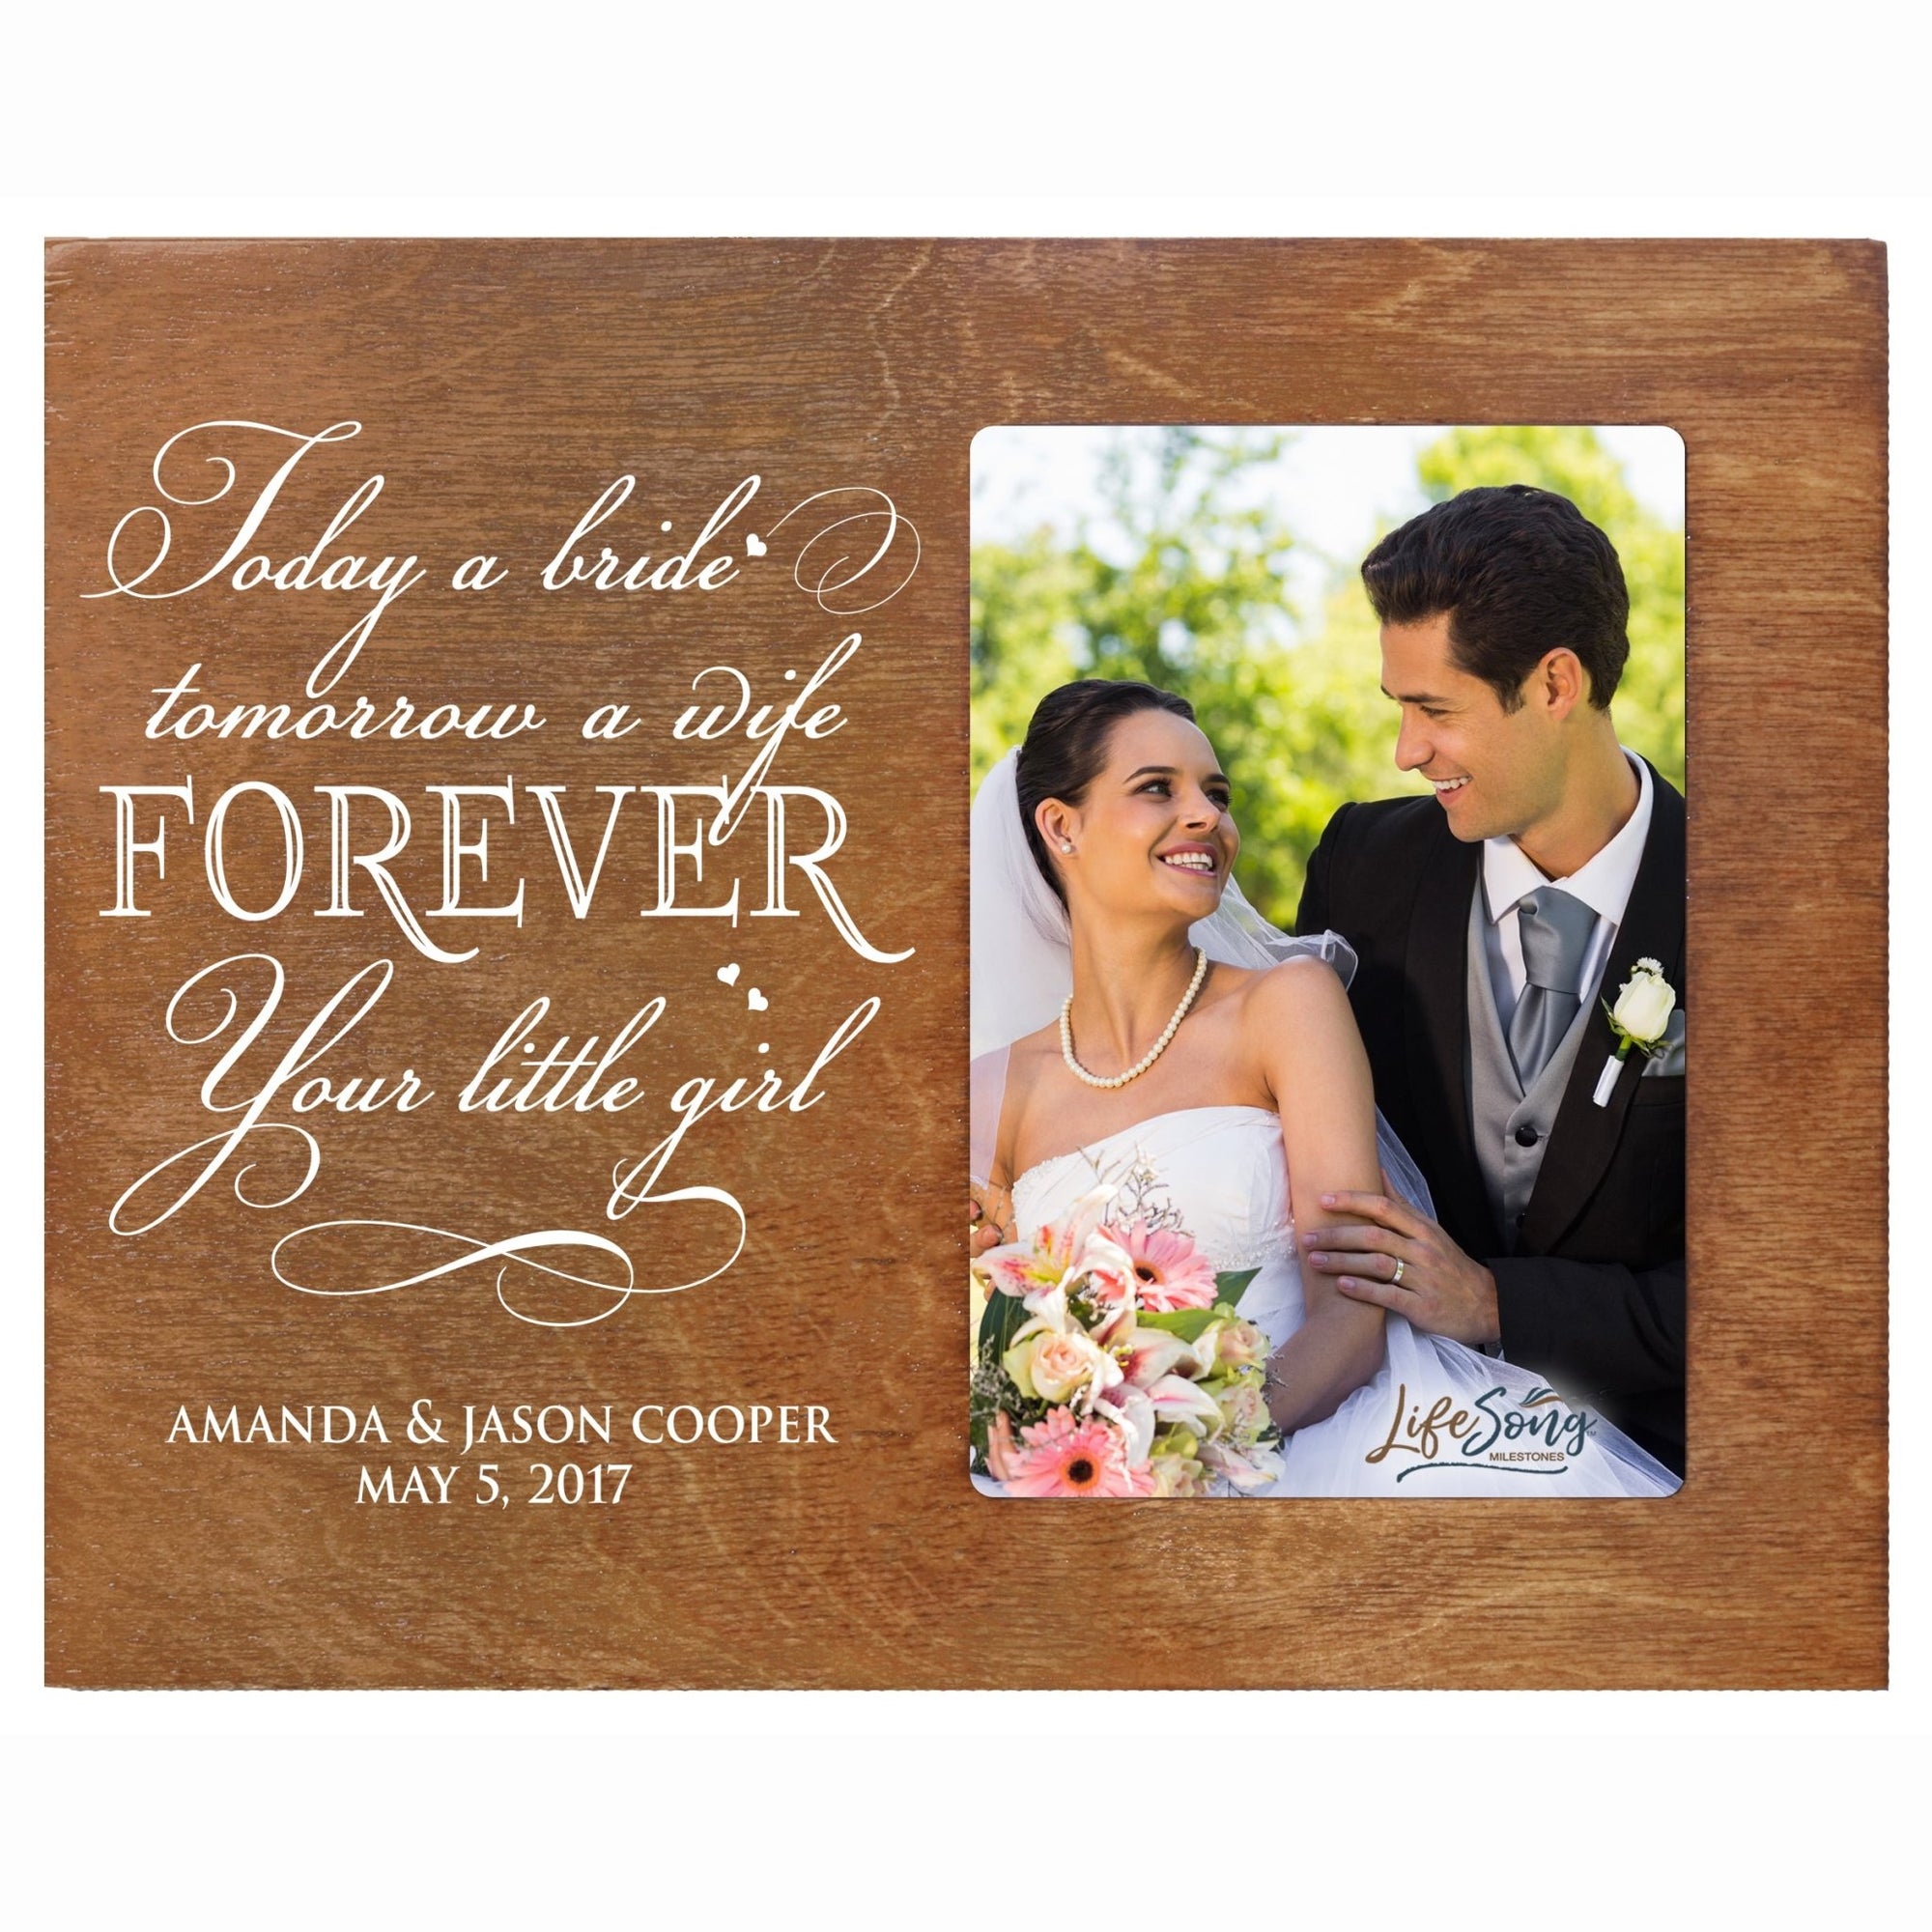 Personalized Wedding Keepsake Picture Frames - Today A Bride - LifeSong Milestones